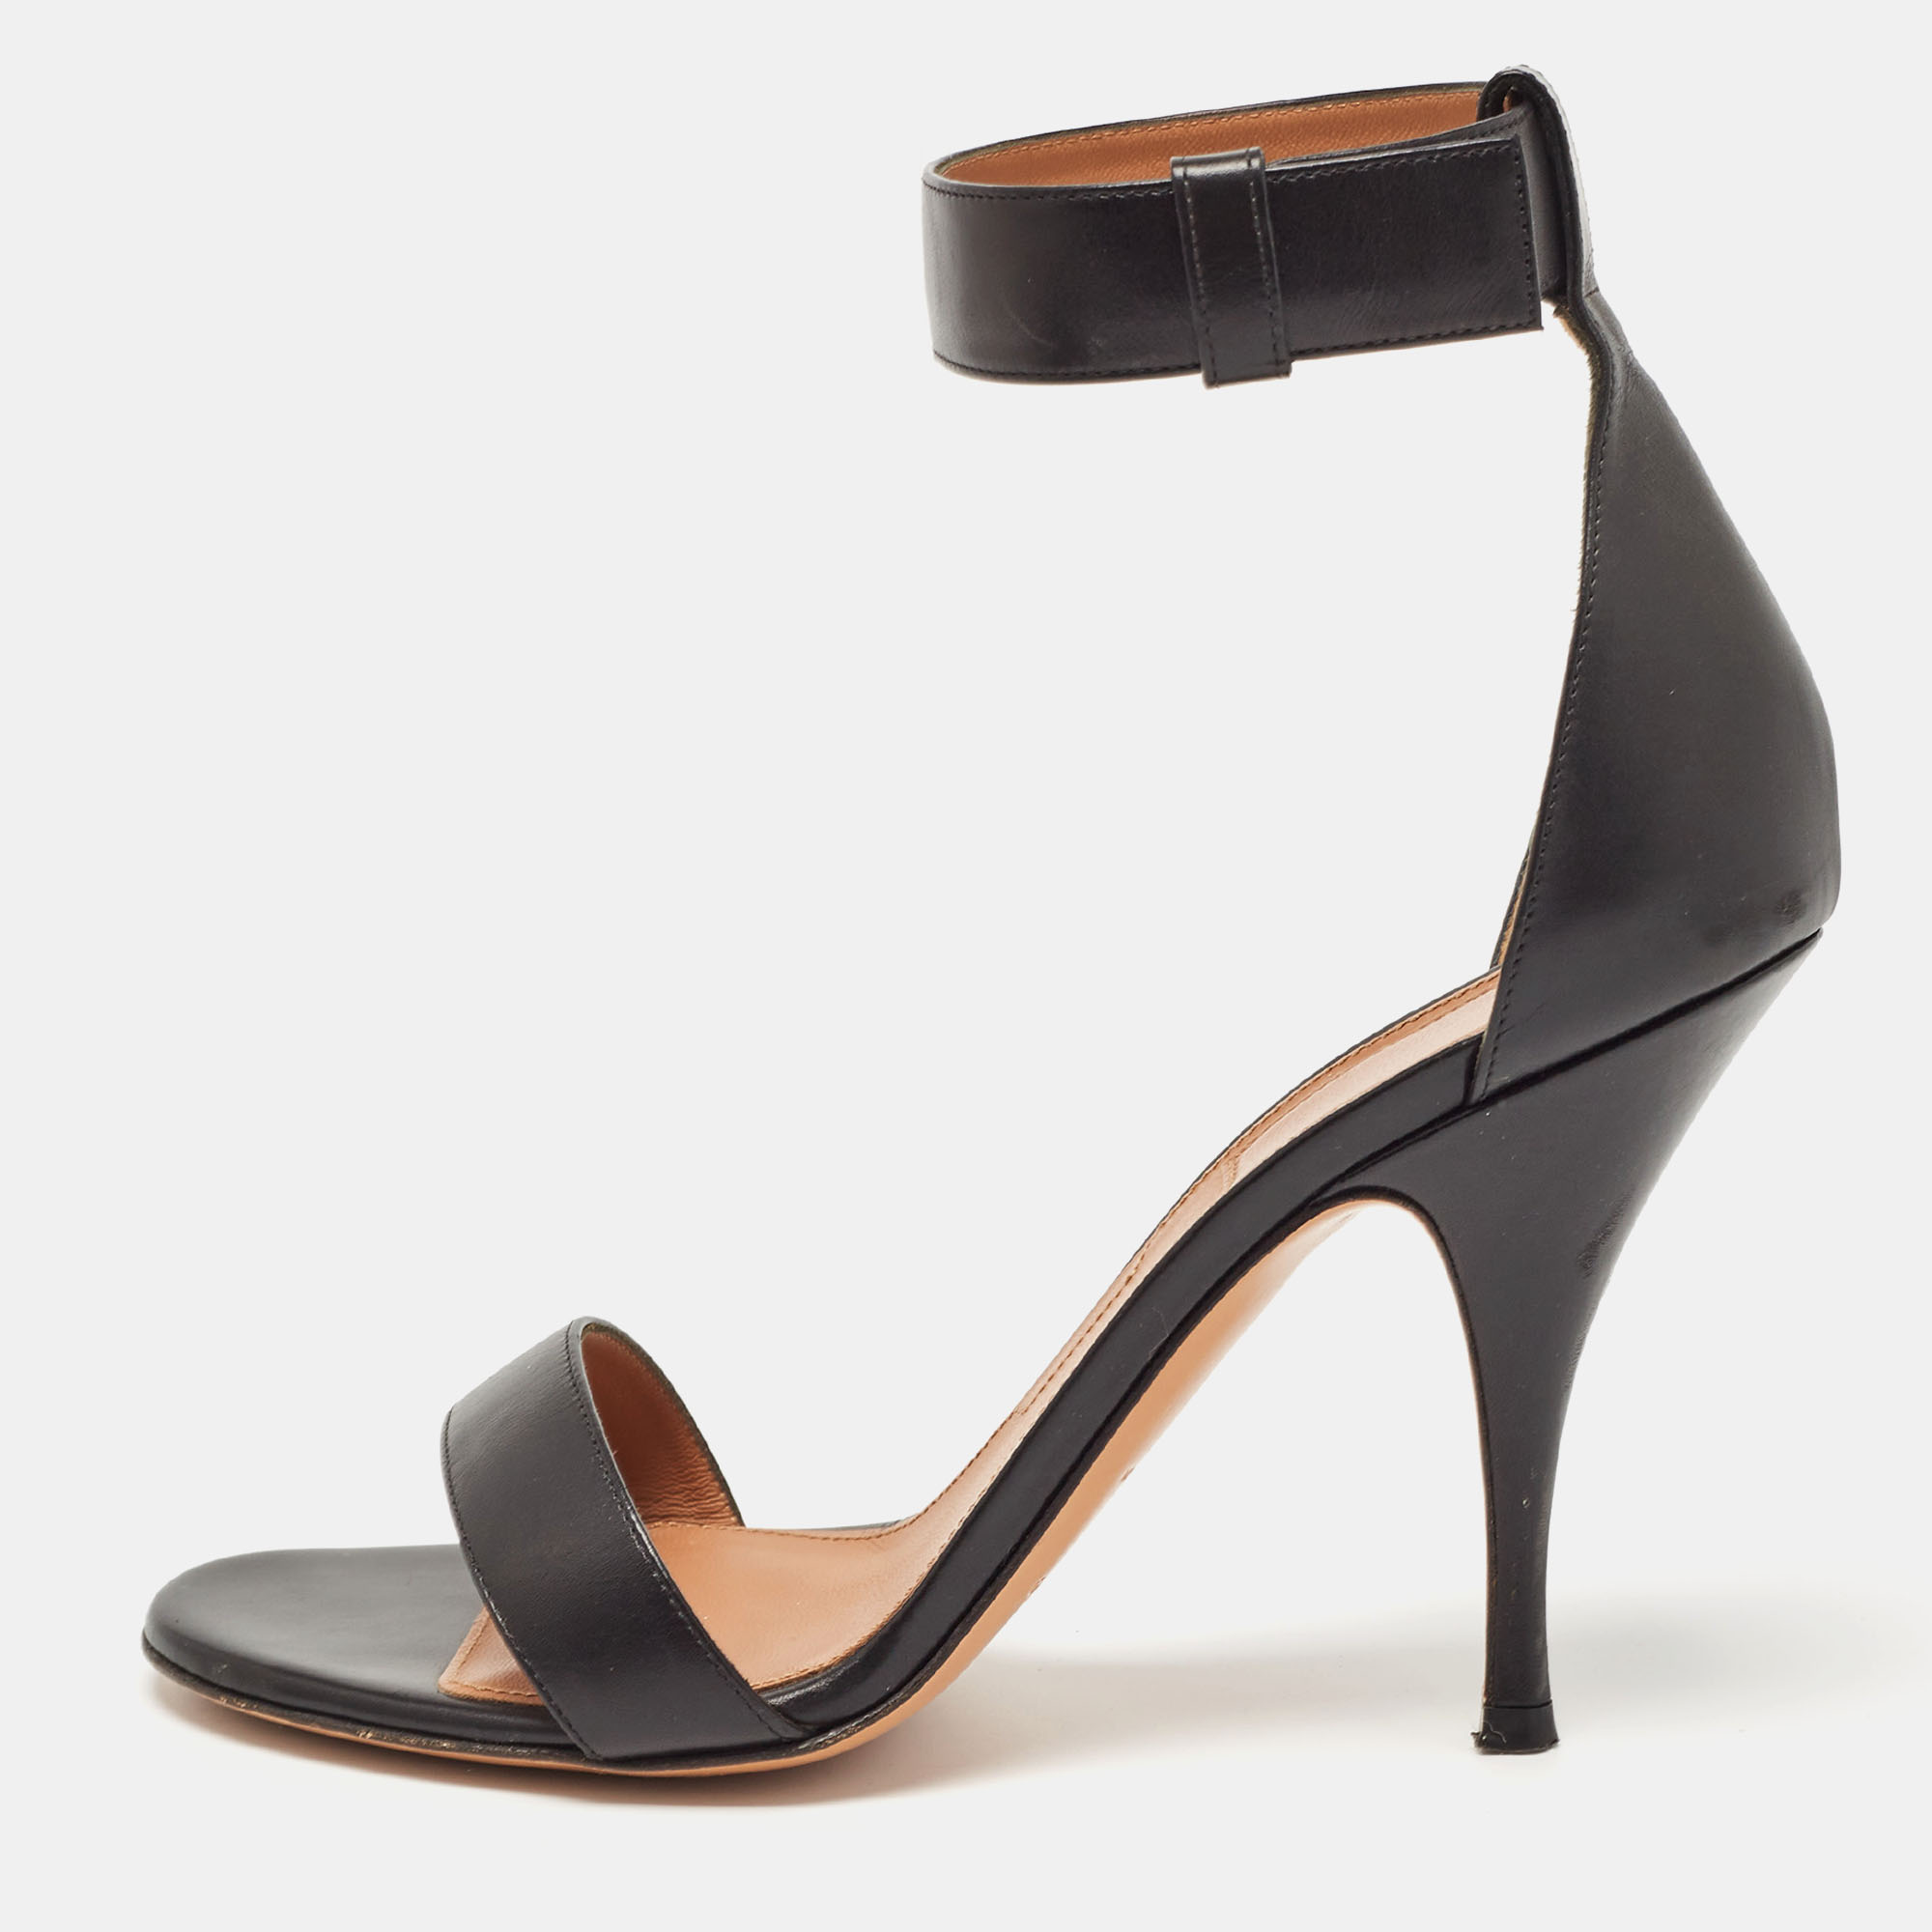 Givenchy black leather ankle strap sandals size 39